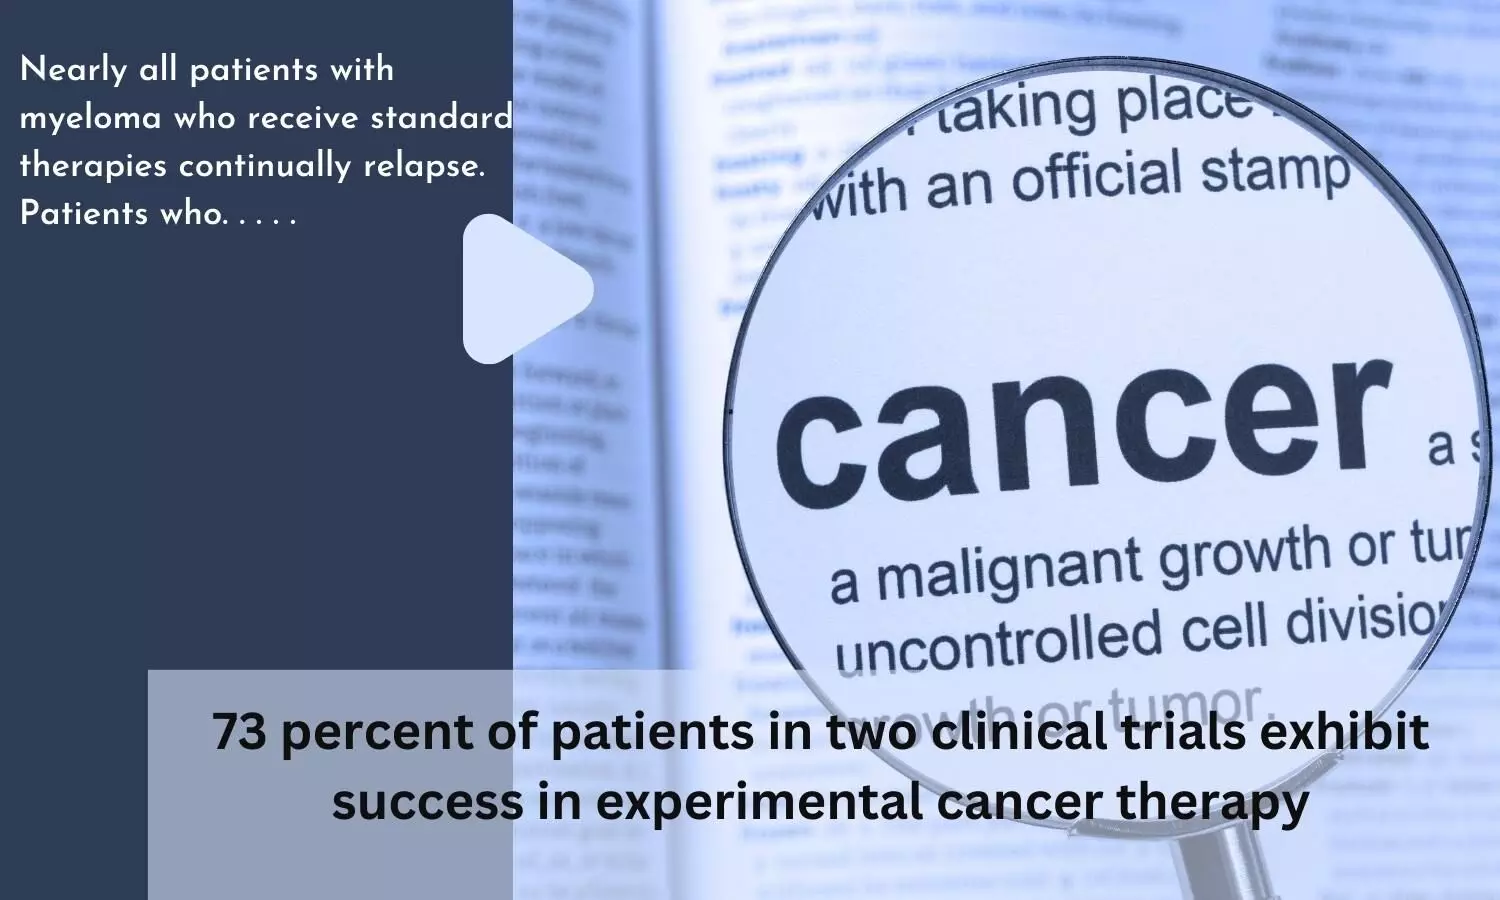 73 percent of patients in two clinical trials exhibit success in experimental cancer therapy